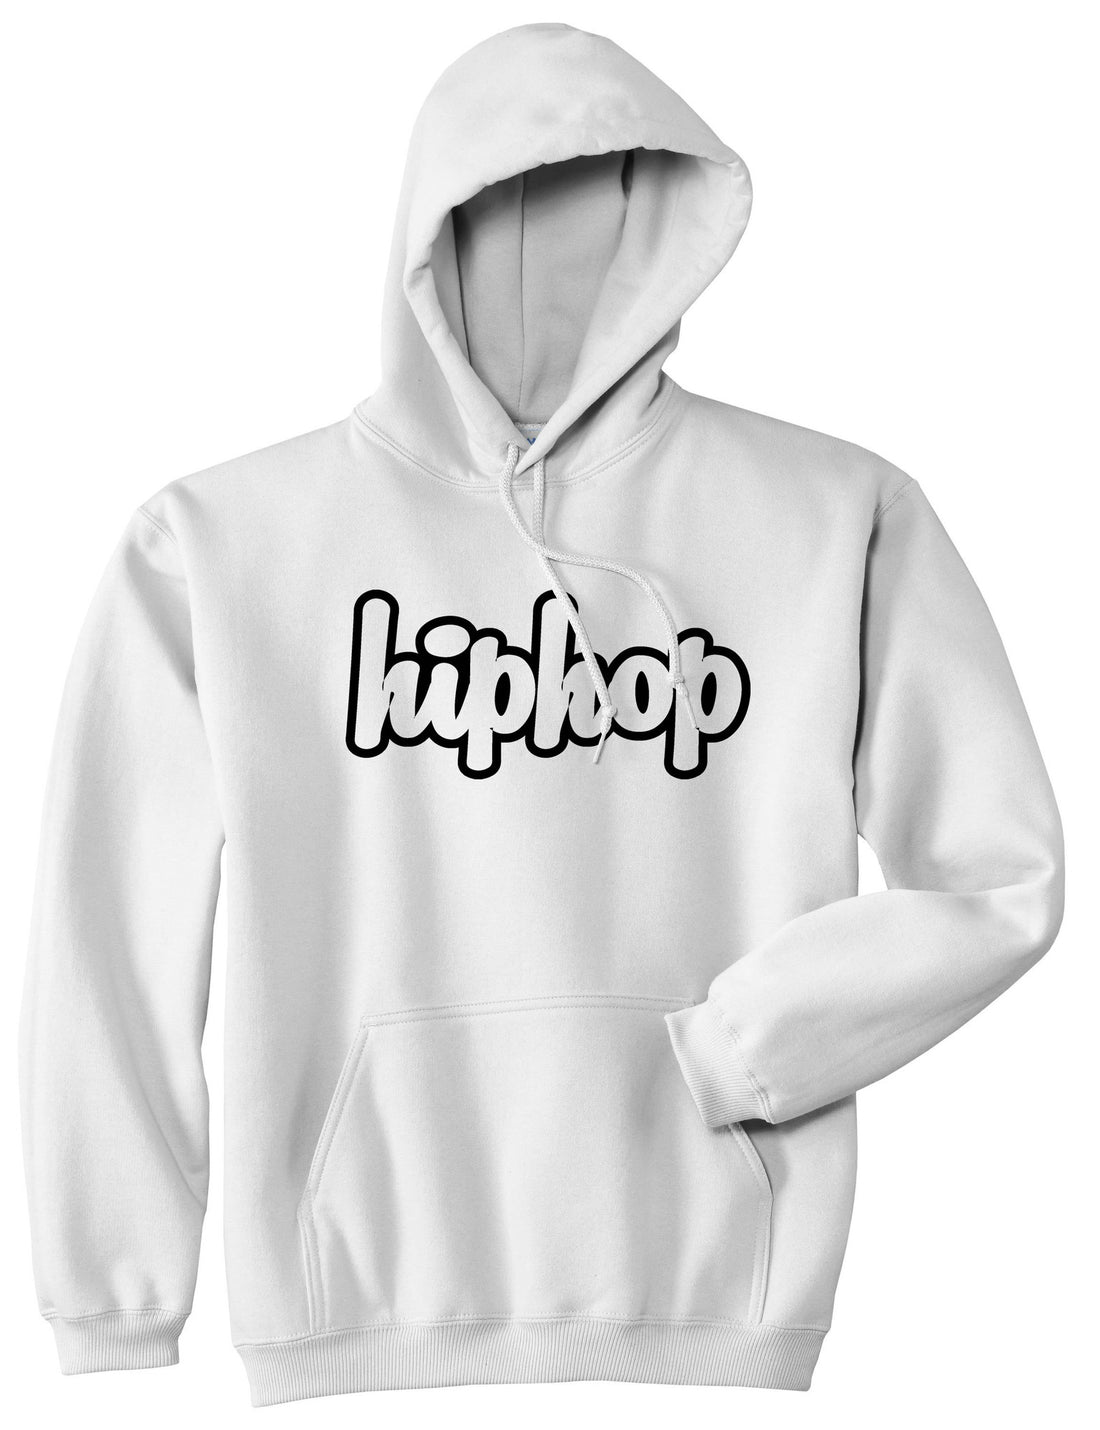 Hiphop Outline Old School Pullover Hoodie in White By Kings Of NY